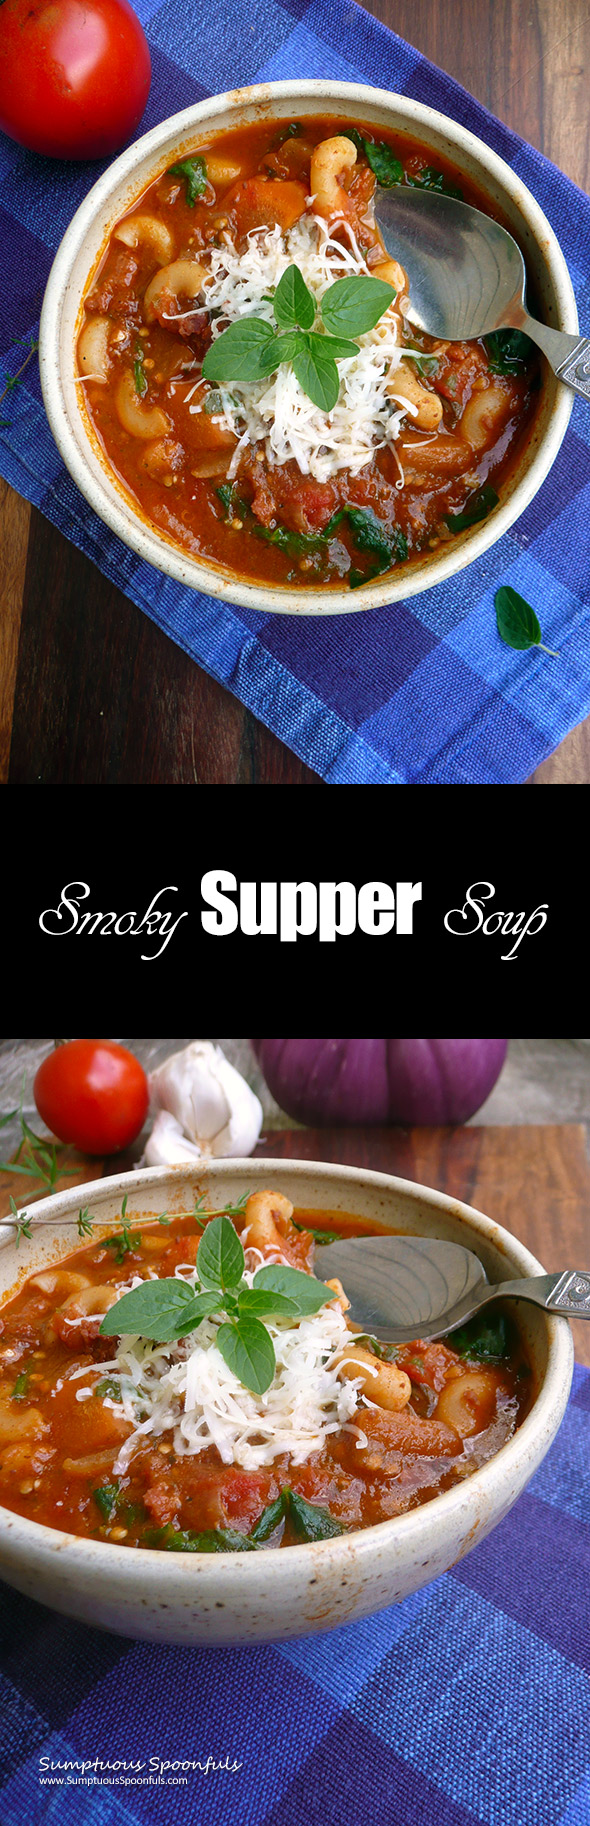 Smoky Supper Soup ~ A hearty meal in a bowl, with a nice smoky flavor from grilling the veggies ~ Sumptuous Spoonfuls #soup #recipe